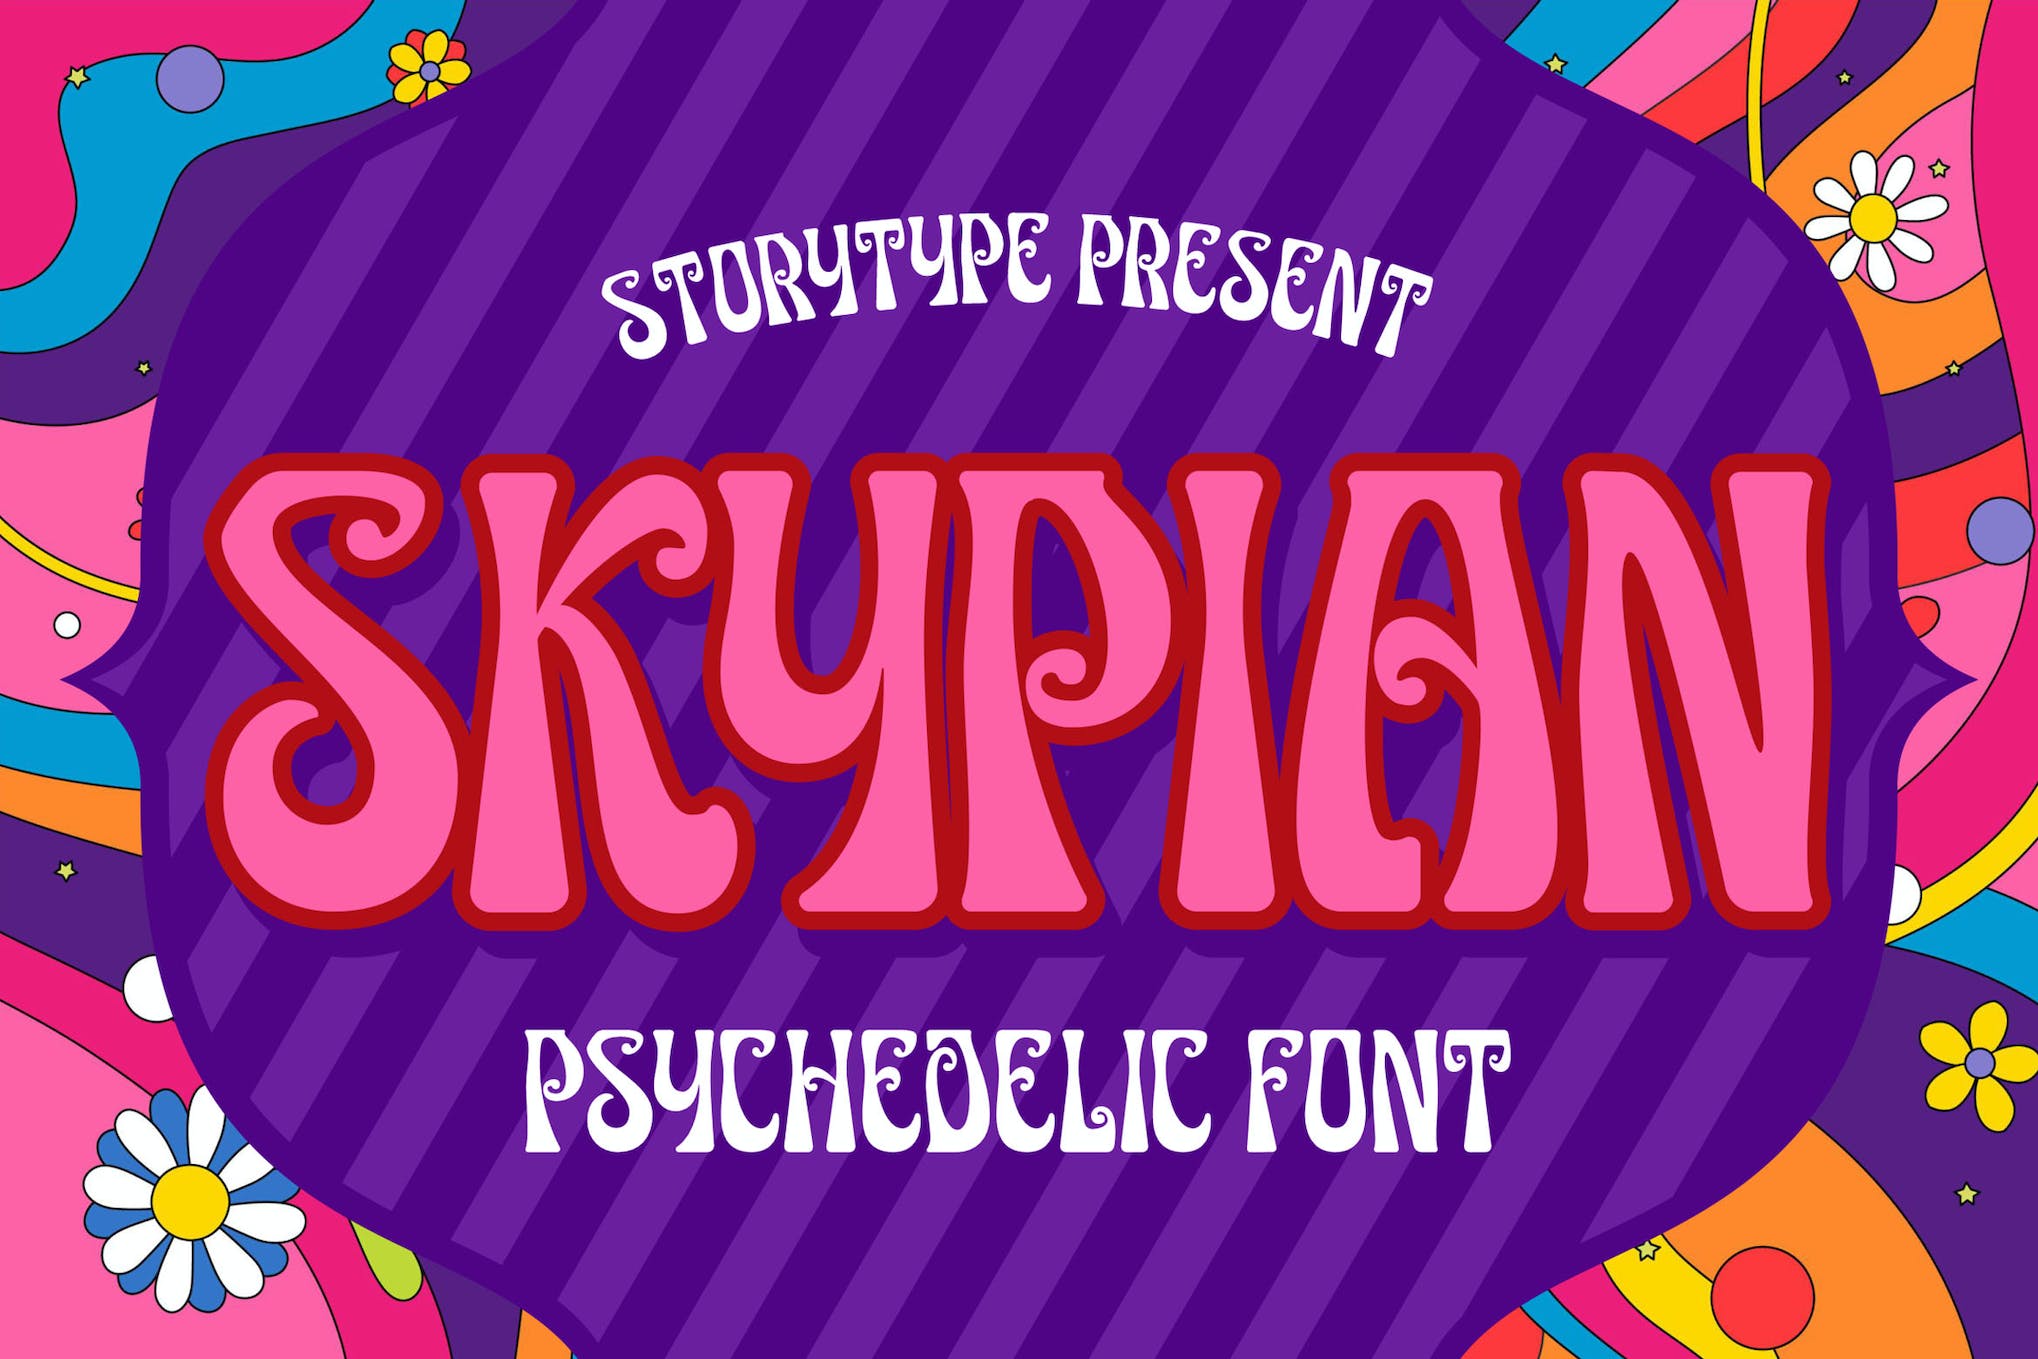 Skypian Psychedelic Font